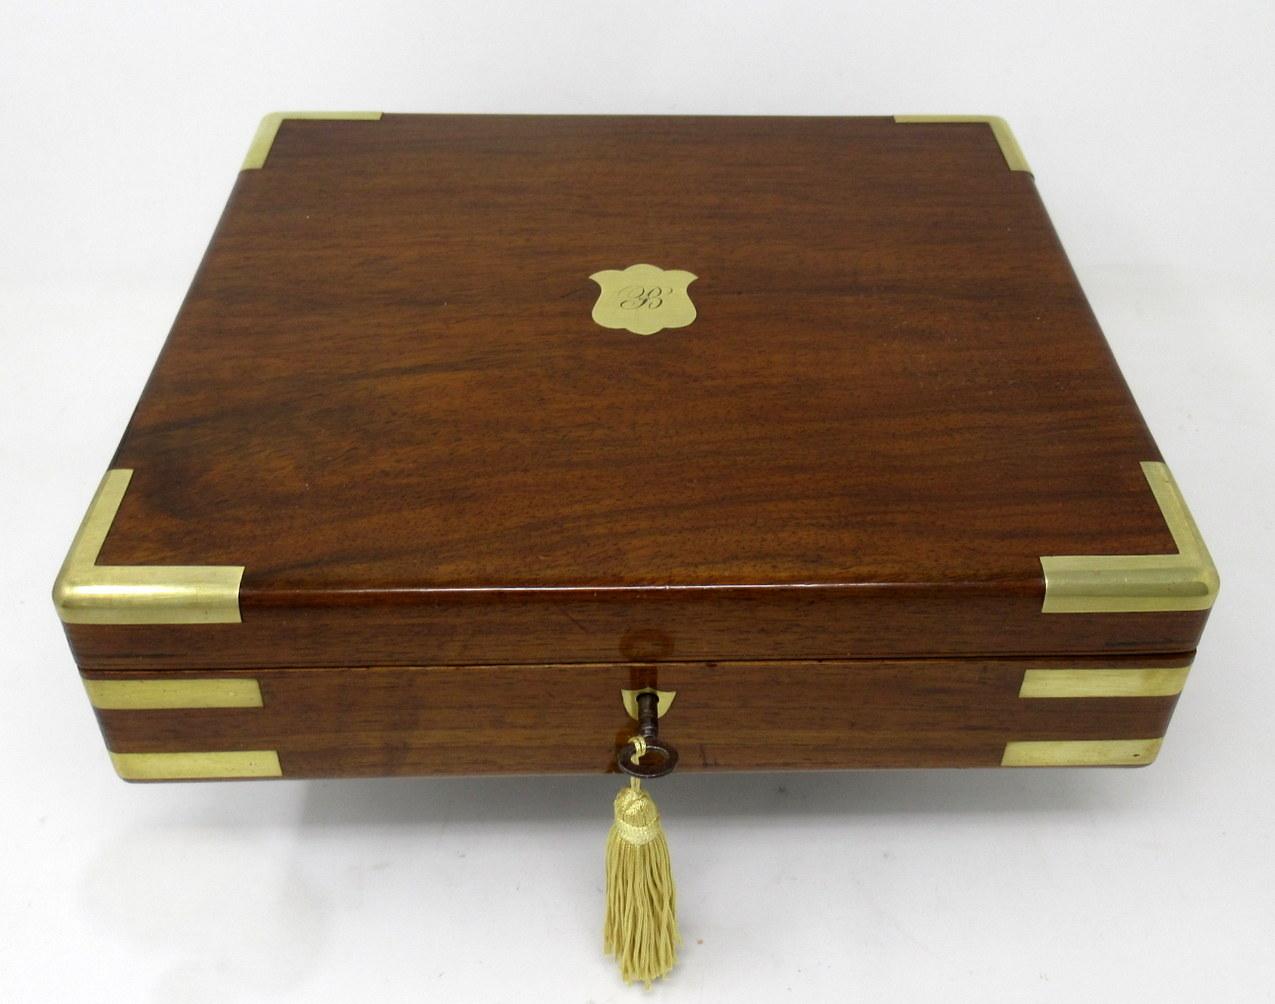 Georgian Antique Vintage Solid Mahogany Wooden Jewelry Box Casket Brass Bound 19th Cent